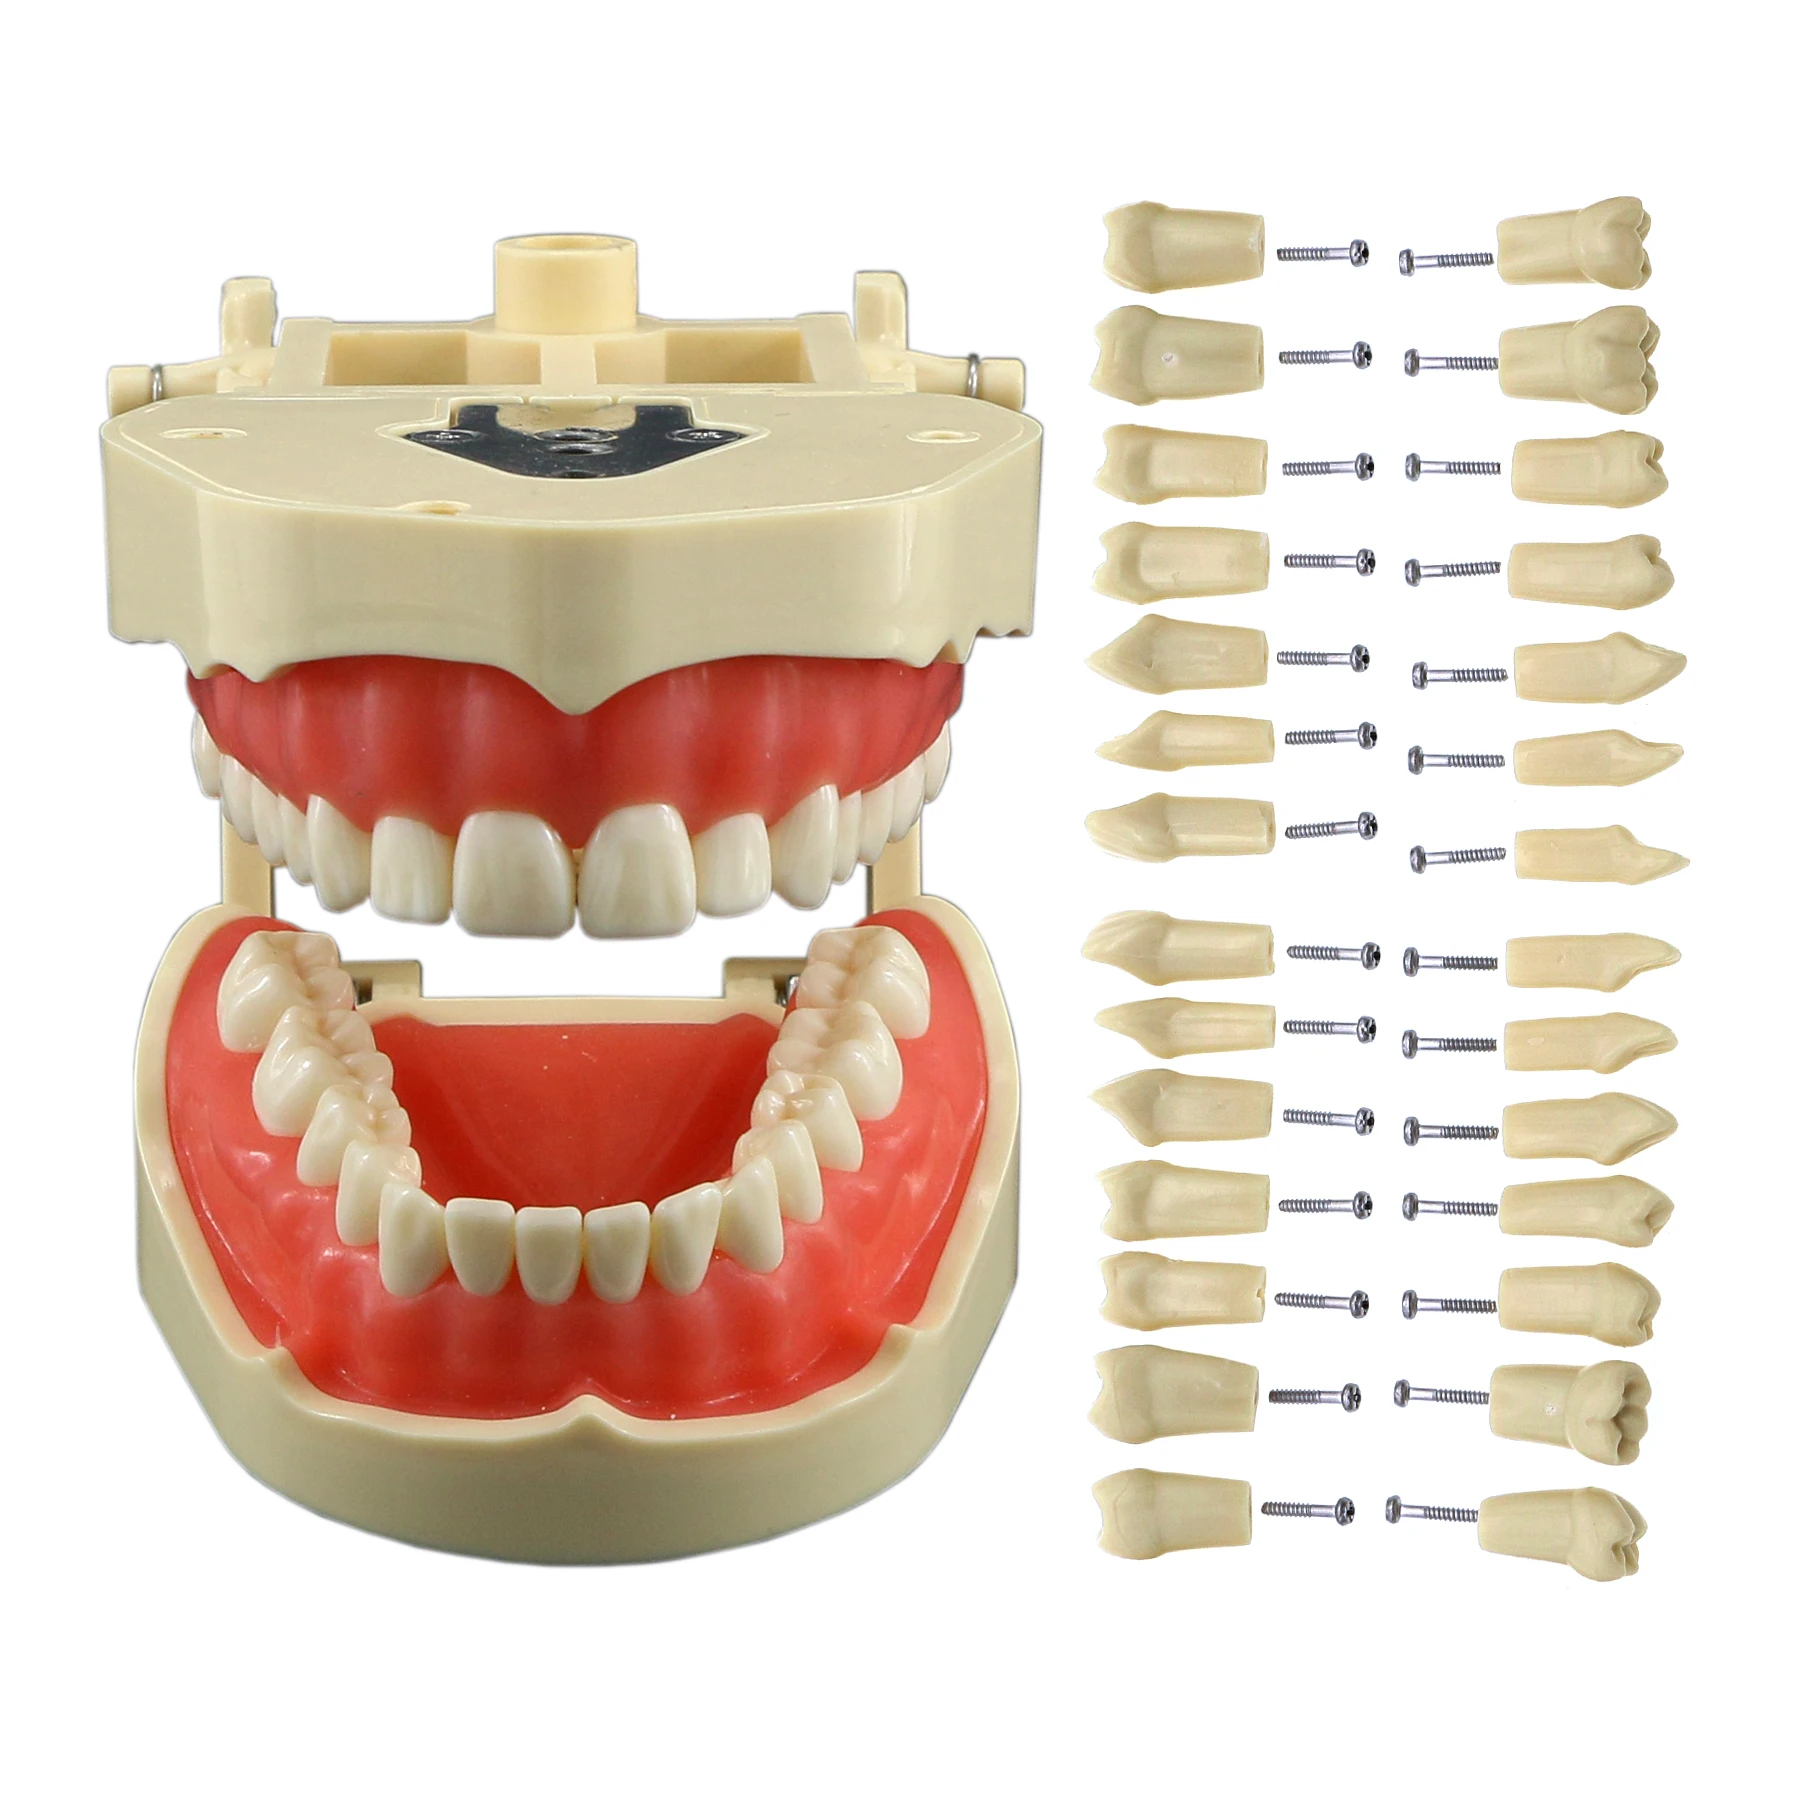 

Frasaco ANA-4 Type Fit Dental Standard Model With 28Pcs Screw-in Teeth Typodont Practice Filling Restoration Demo M8013 M8021